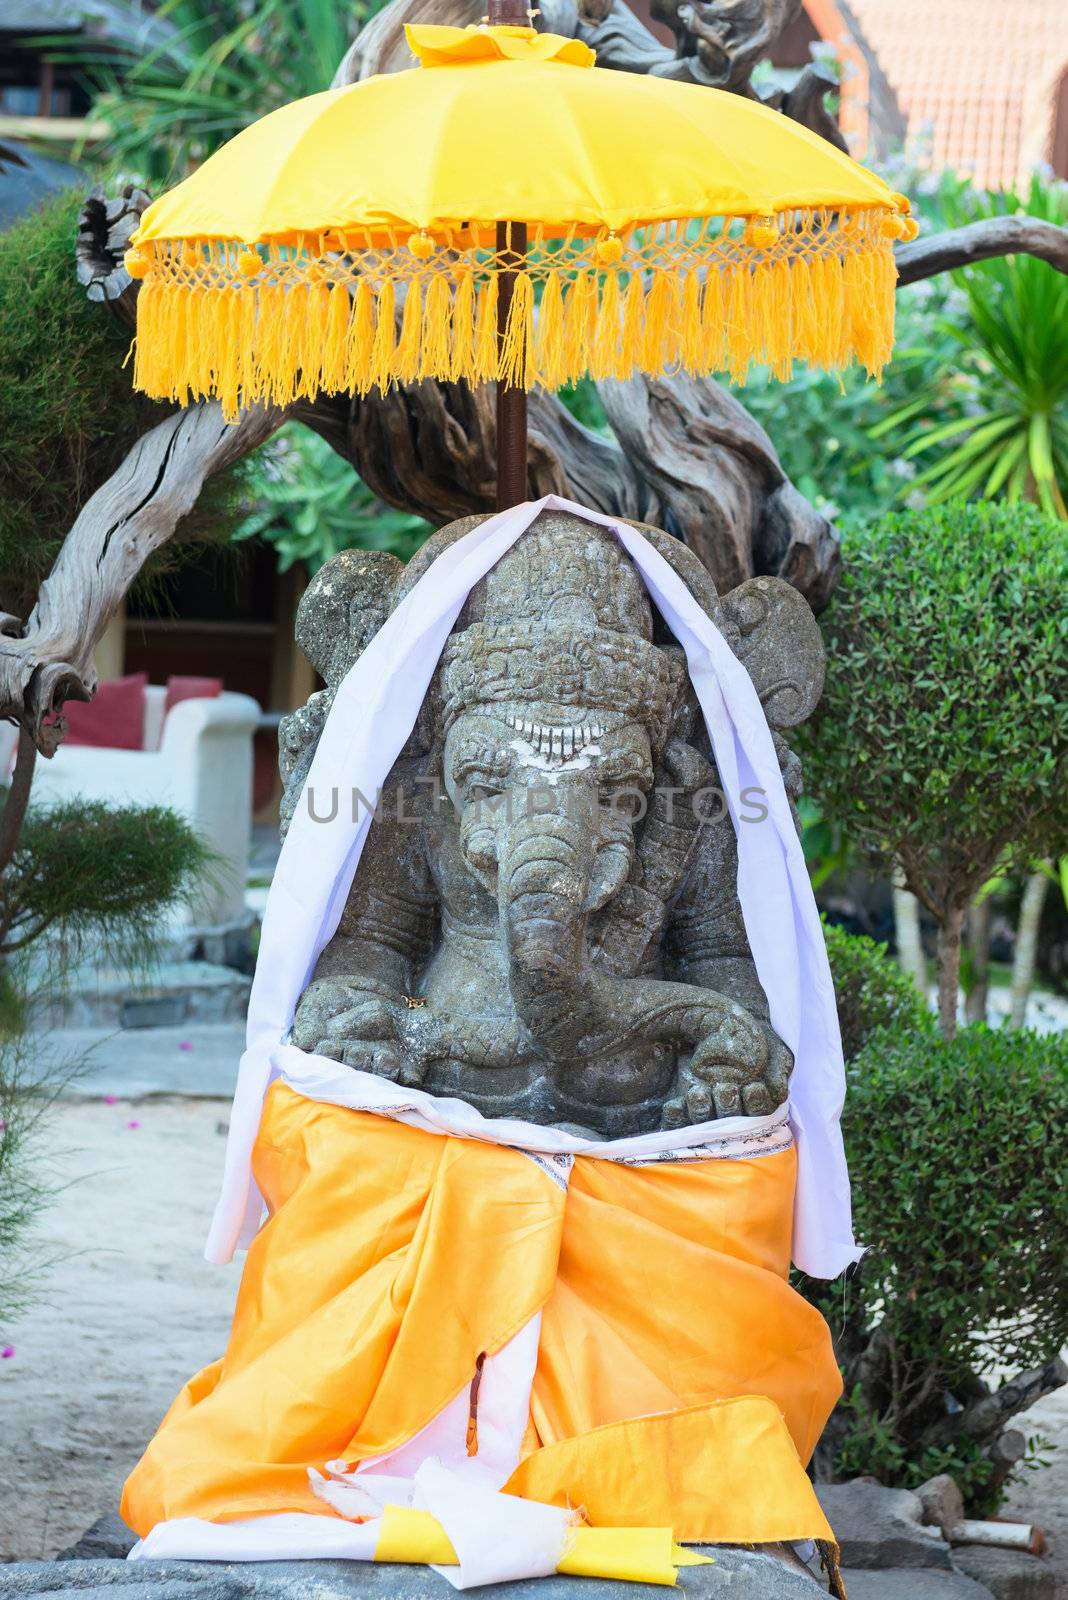 Ganesh sculpture decorated with yellow fabric and umbrella in Bali style